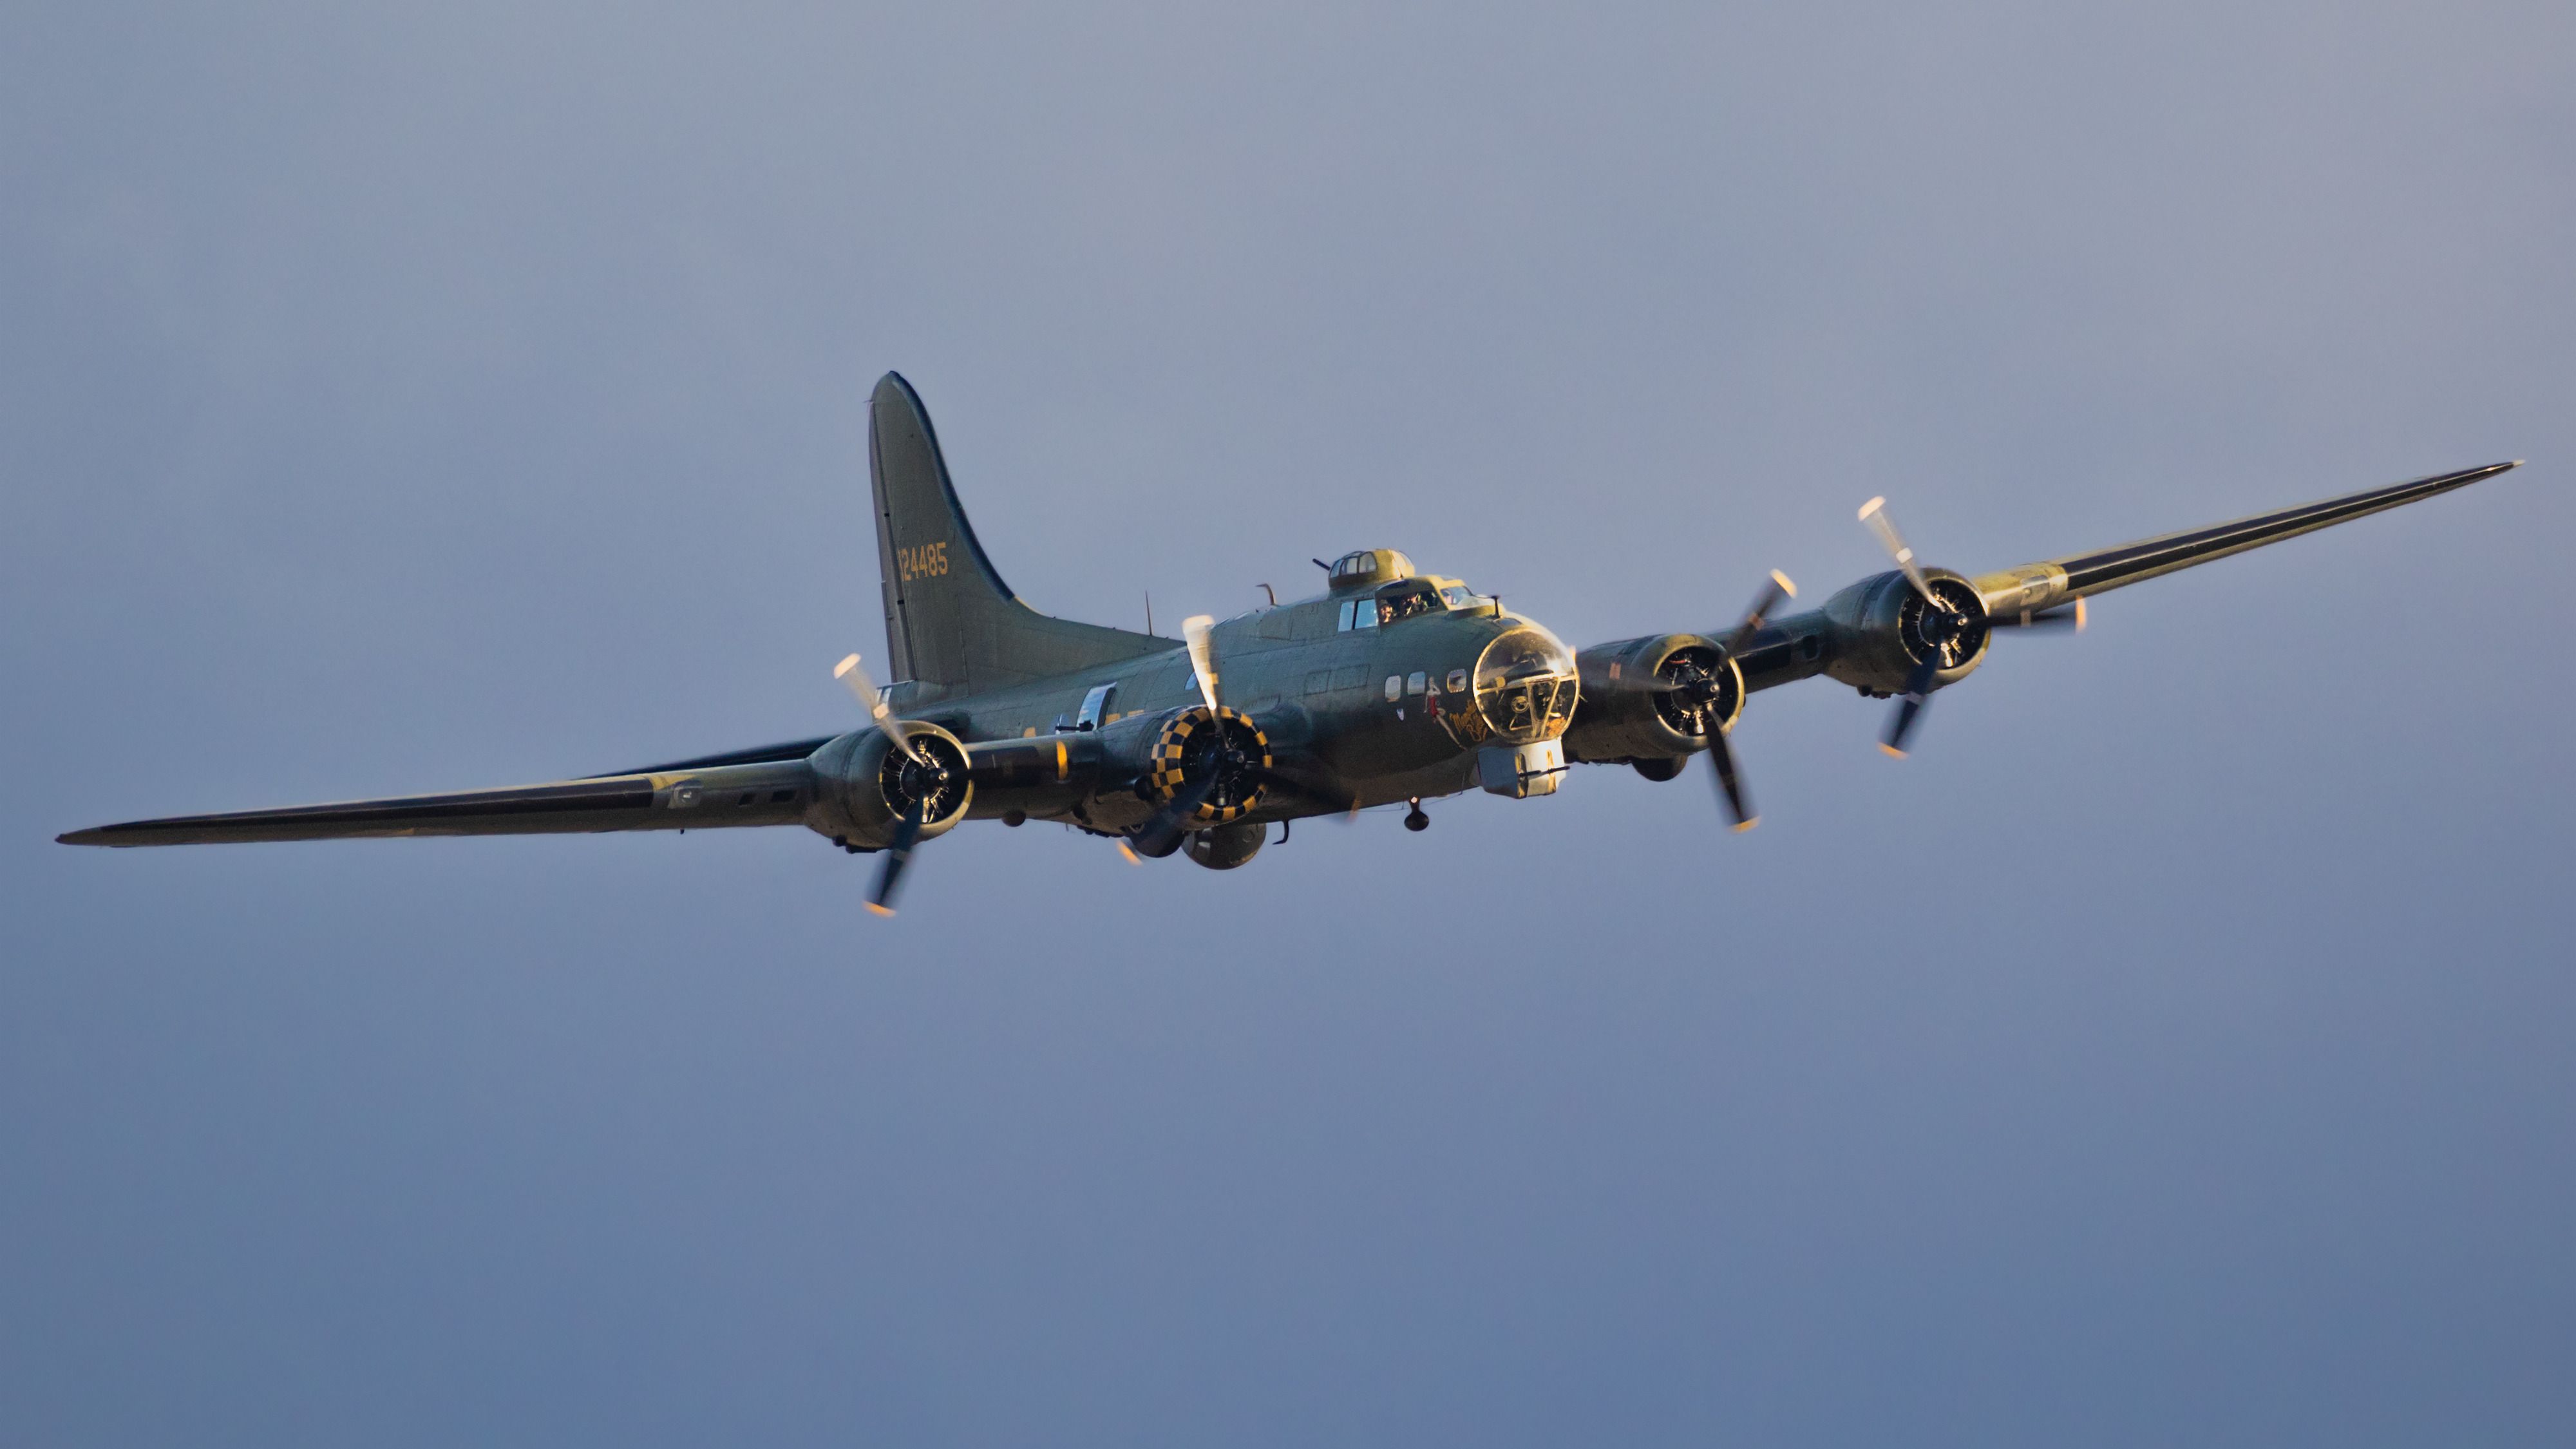 A Vintage US Air Force Boeing B-17 Flying Fortress Flying In The Sky.